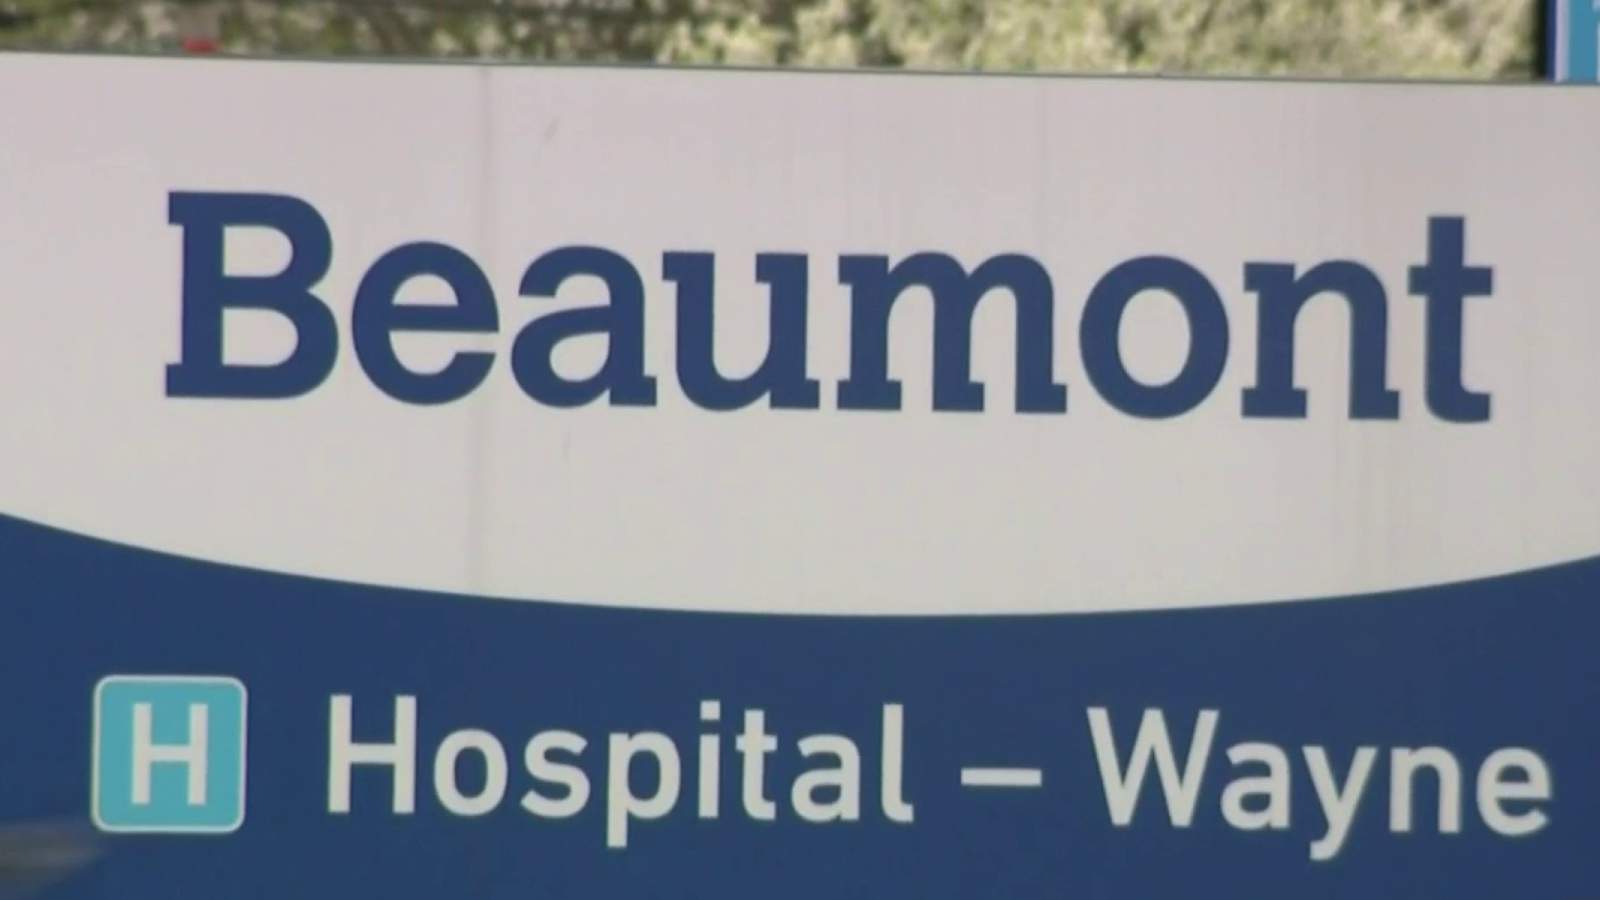 Beaumont Wayne Hospital now open after temporarily closing during COVID-19 outbreak